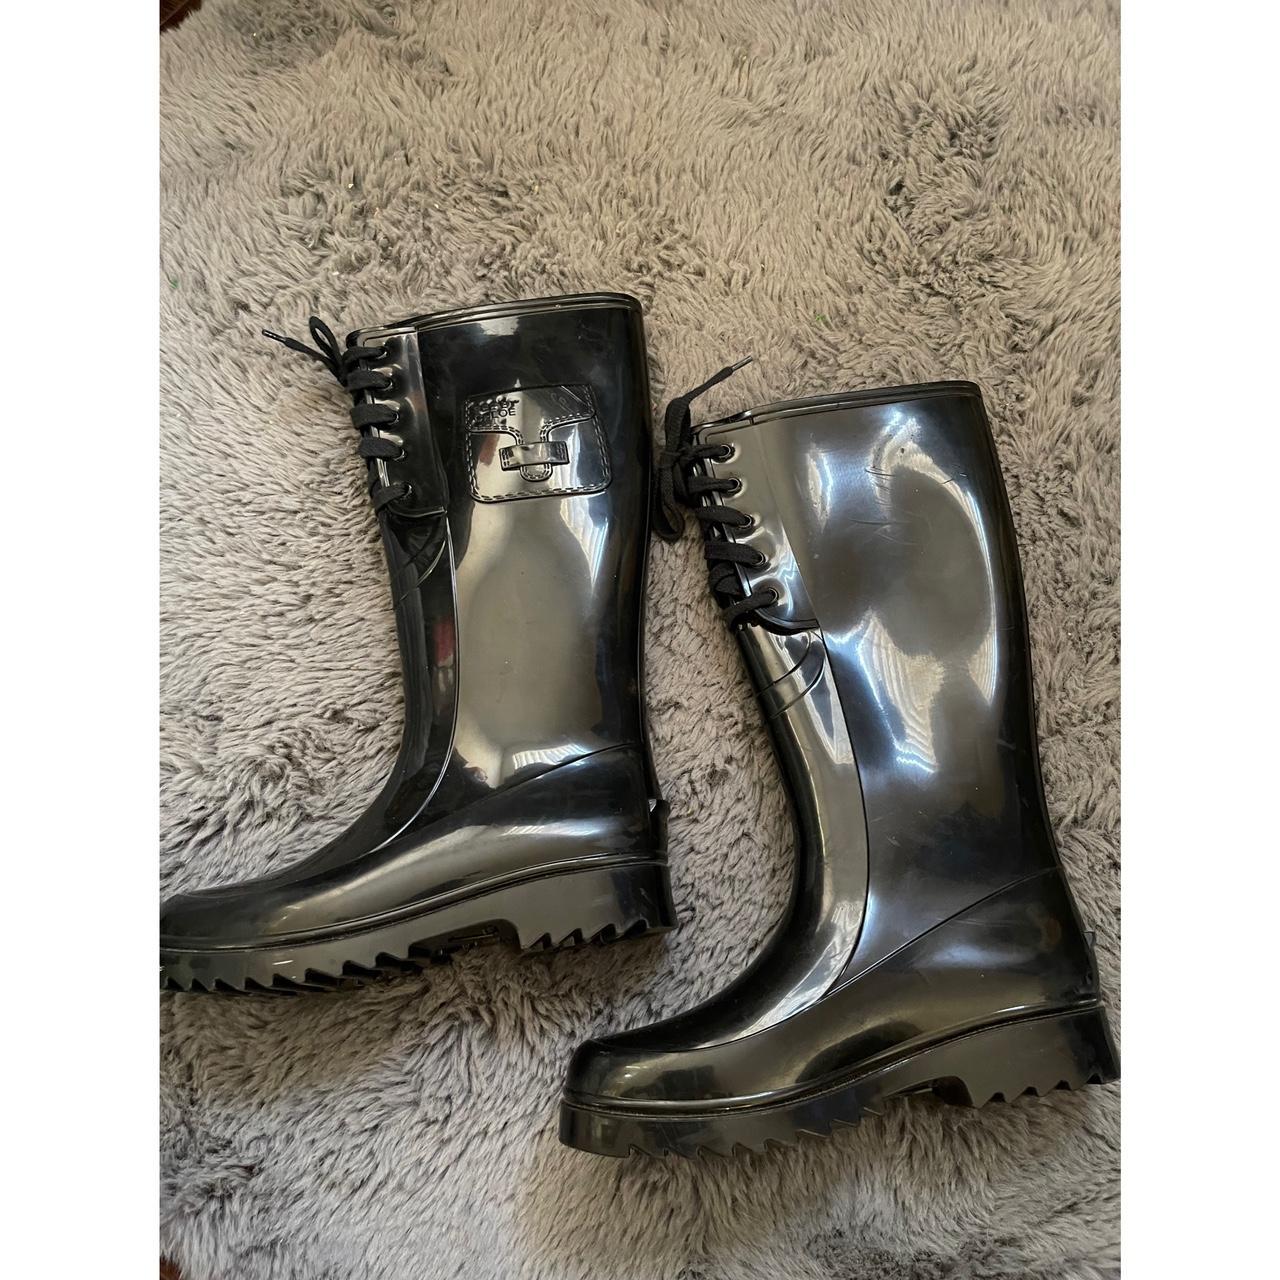 Product Image 1 - See by Chloe rain boots

Has